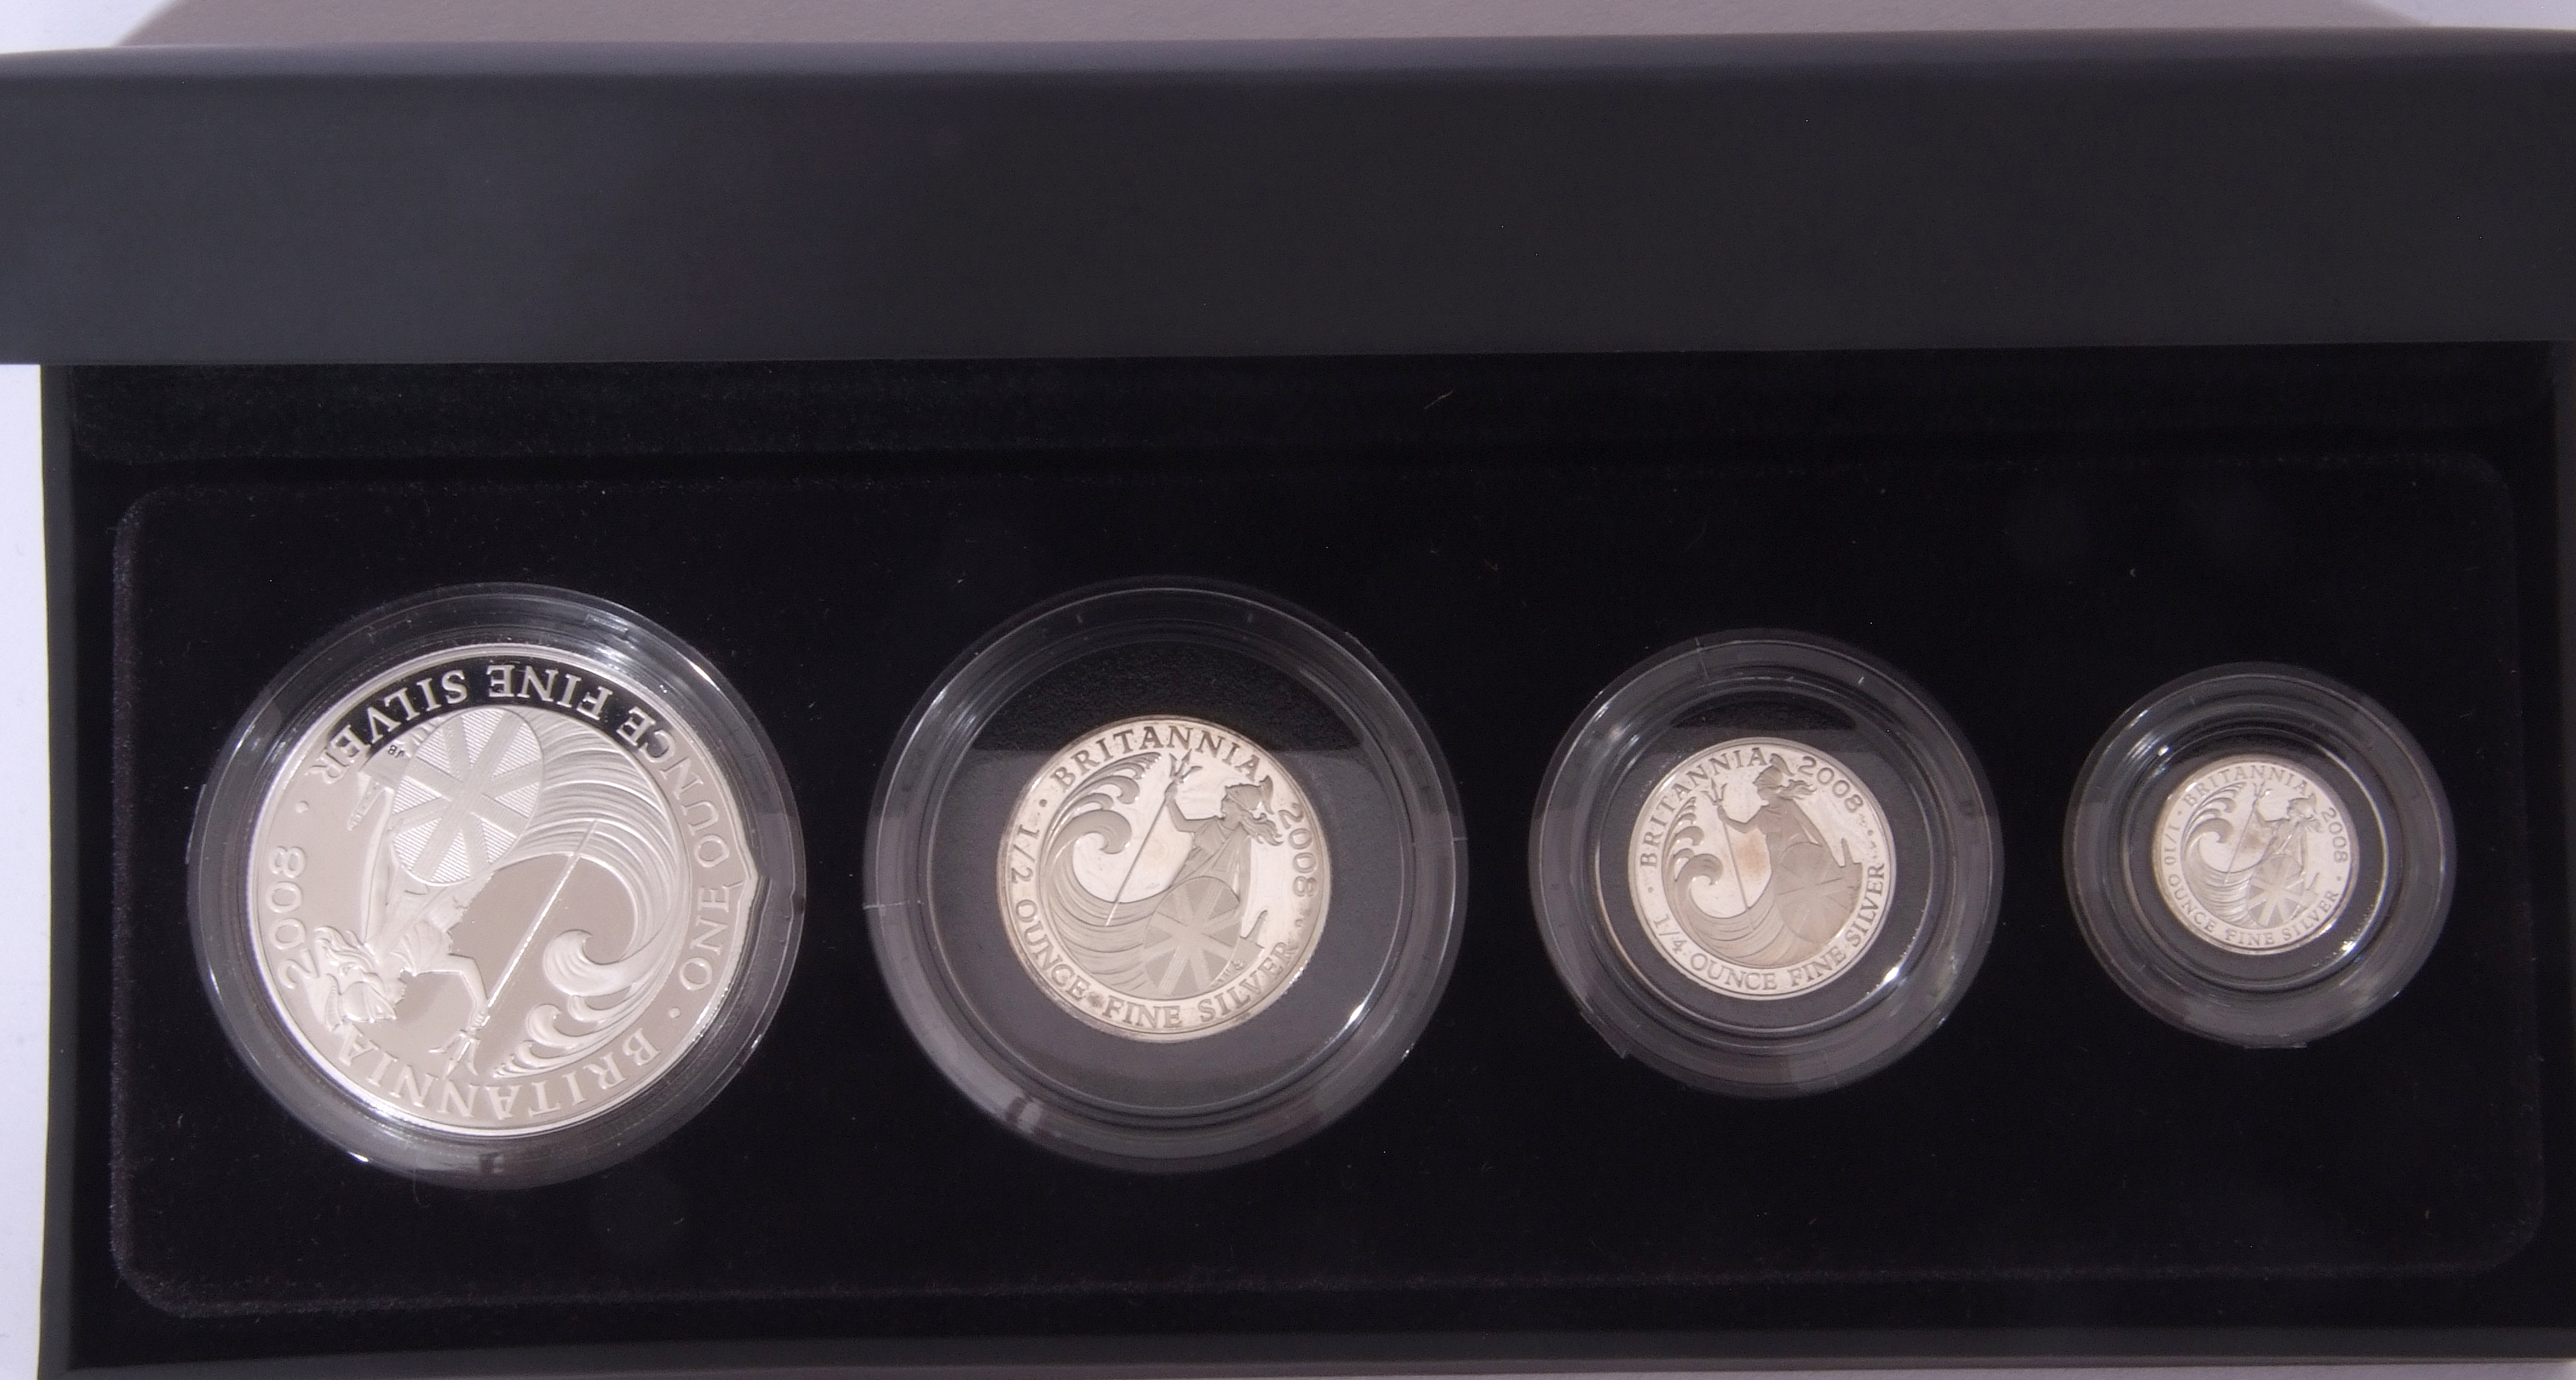 Elizabeth II four coin "Britannia" silver proof set 2008, comprising £2, £1, 50p and 20p, limited to - Image 2 of 3